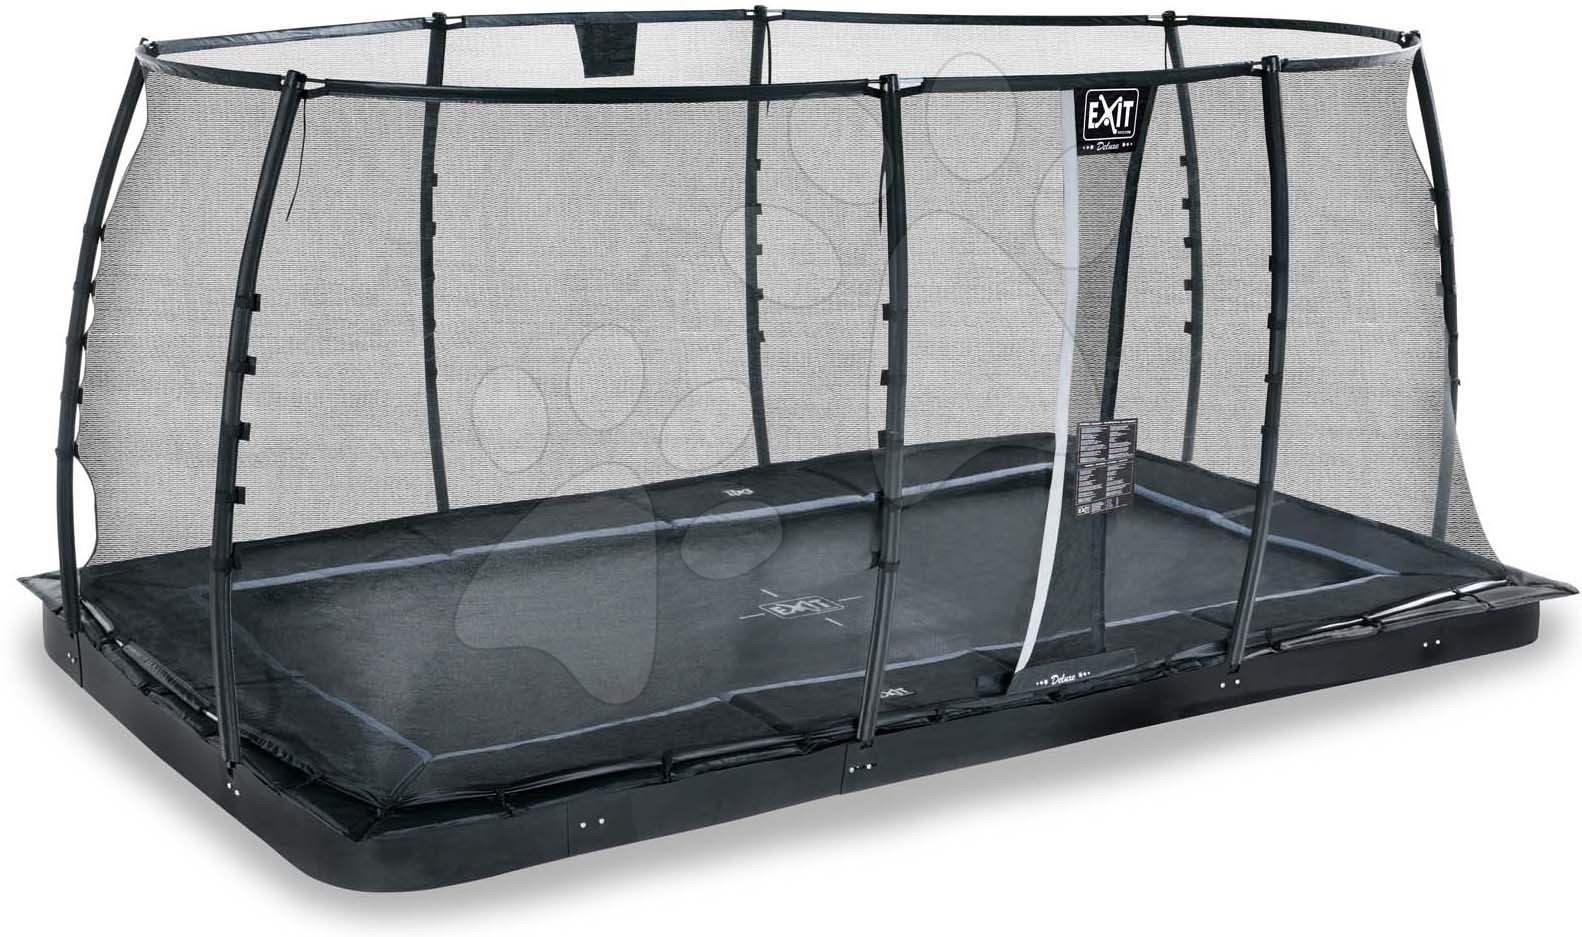 Spelen met Bourgeon periode EXIT Dynamic ground level trampoline 305x519cm with safety n